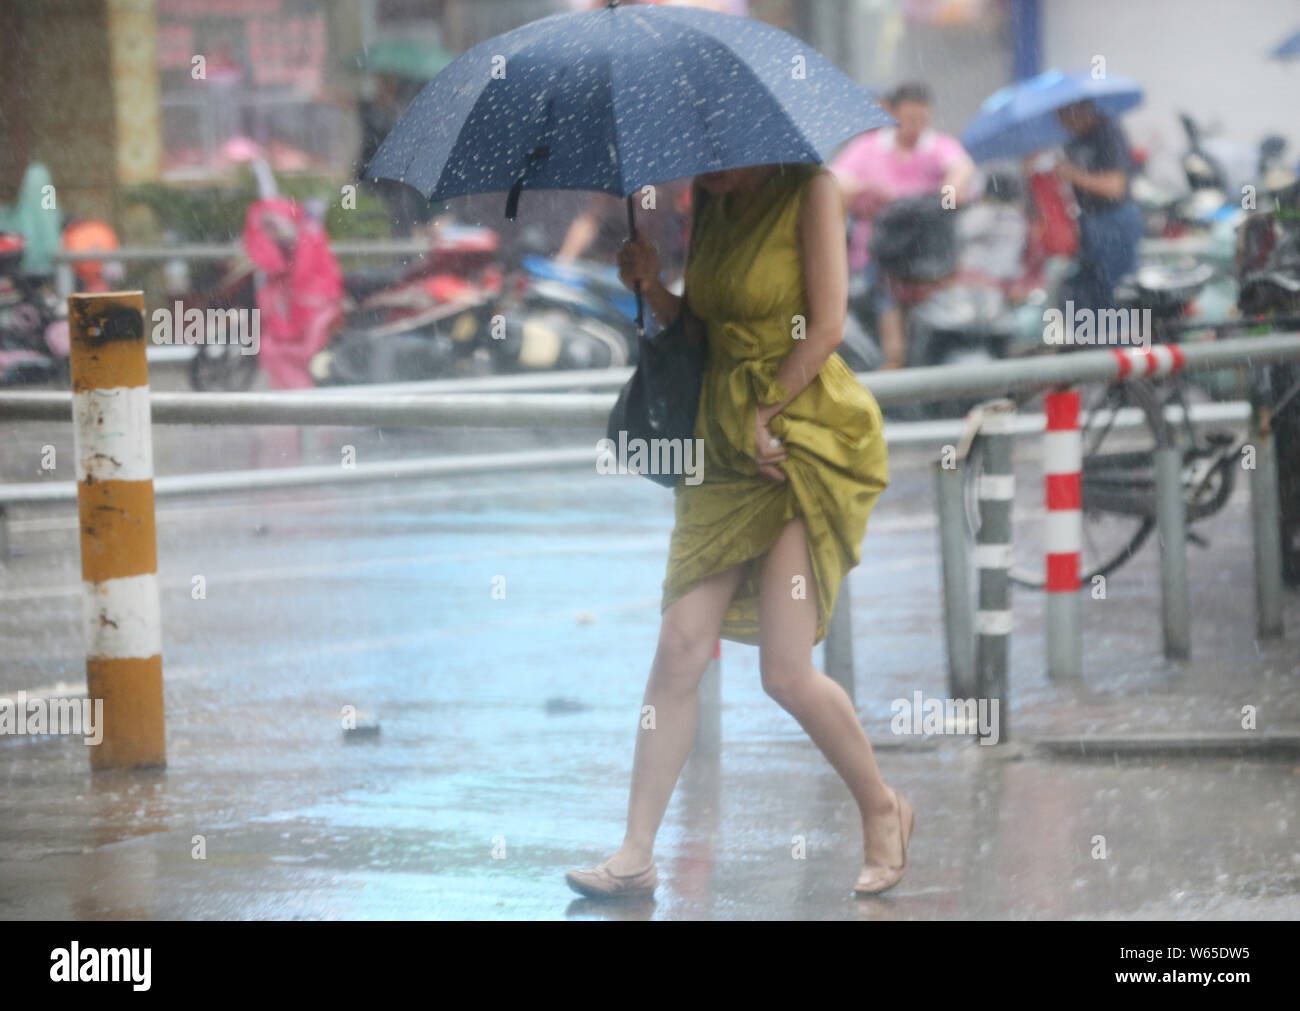 A pedestrian shielding herself with an umbrella braves strong wind and heavy downpour caused by Typhoon Rumbia, the 18th typhoon of the year, in Nanto Stock Photo